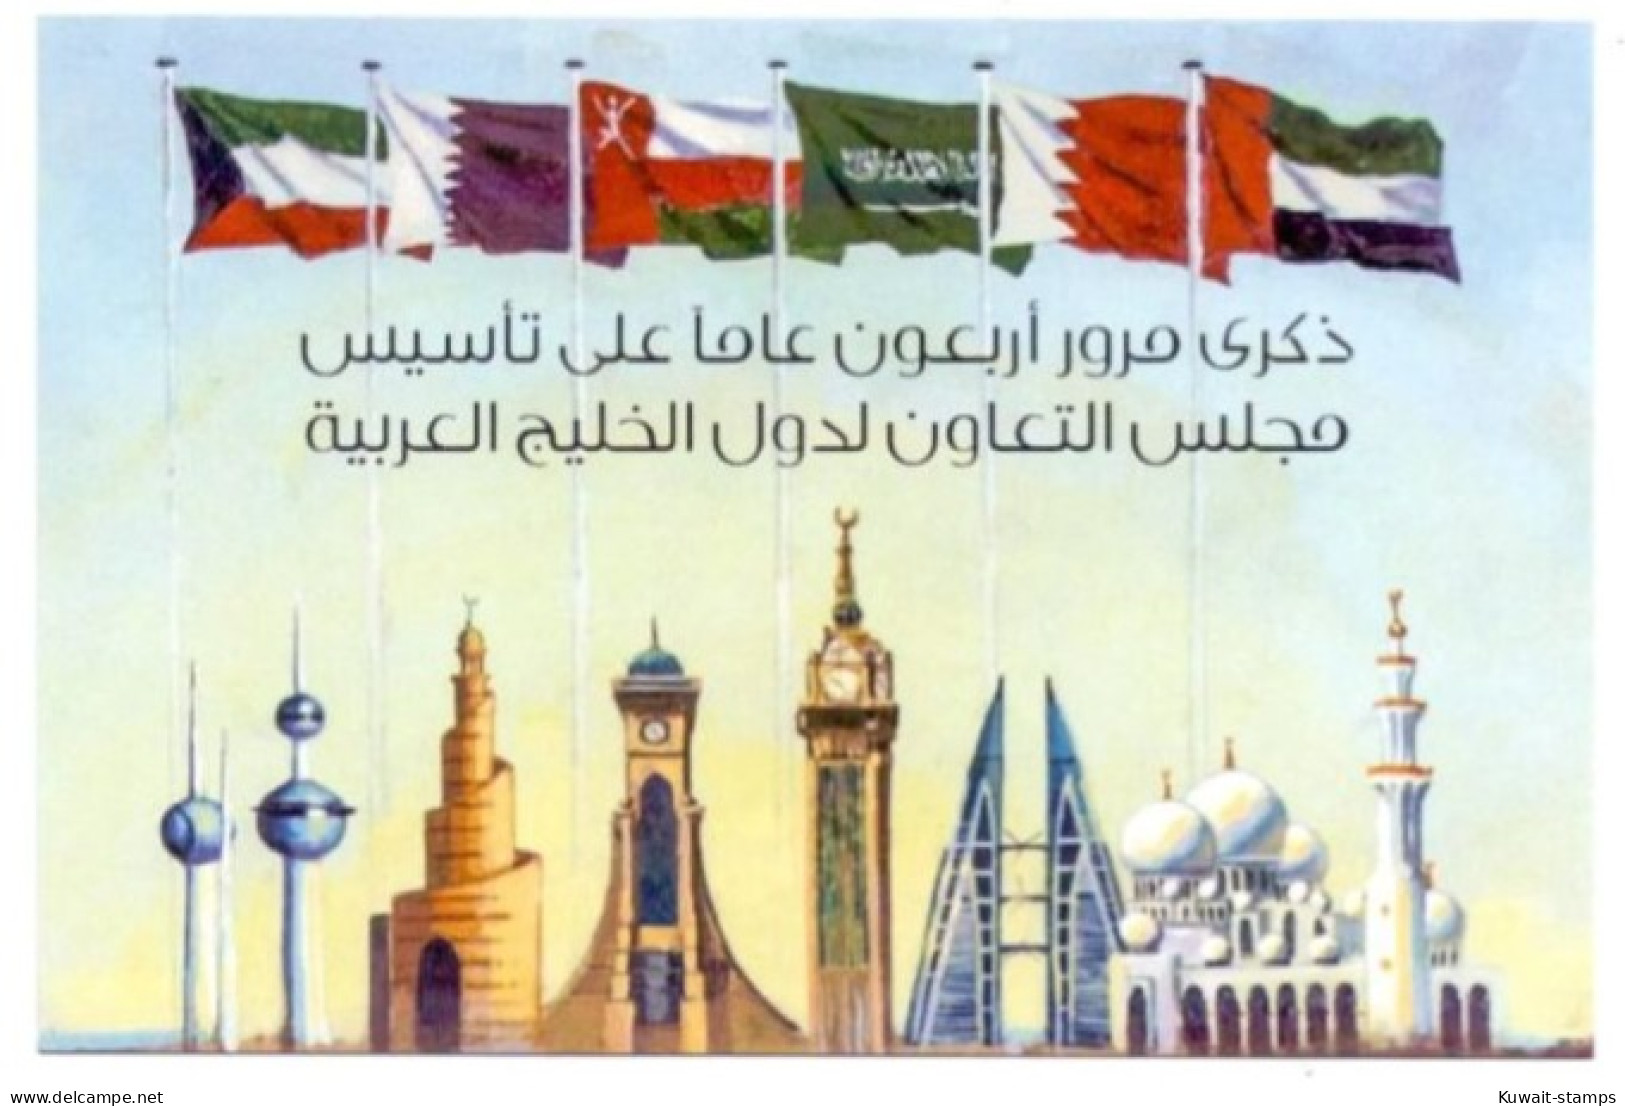 Kuwait 2022 - Official Postcard  Stamp Image Of Kuwait Joint Issues 40th Anniversary Of G.C.C 2022 - Kuwait